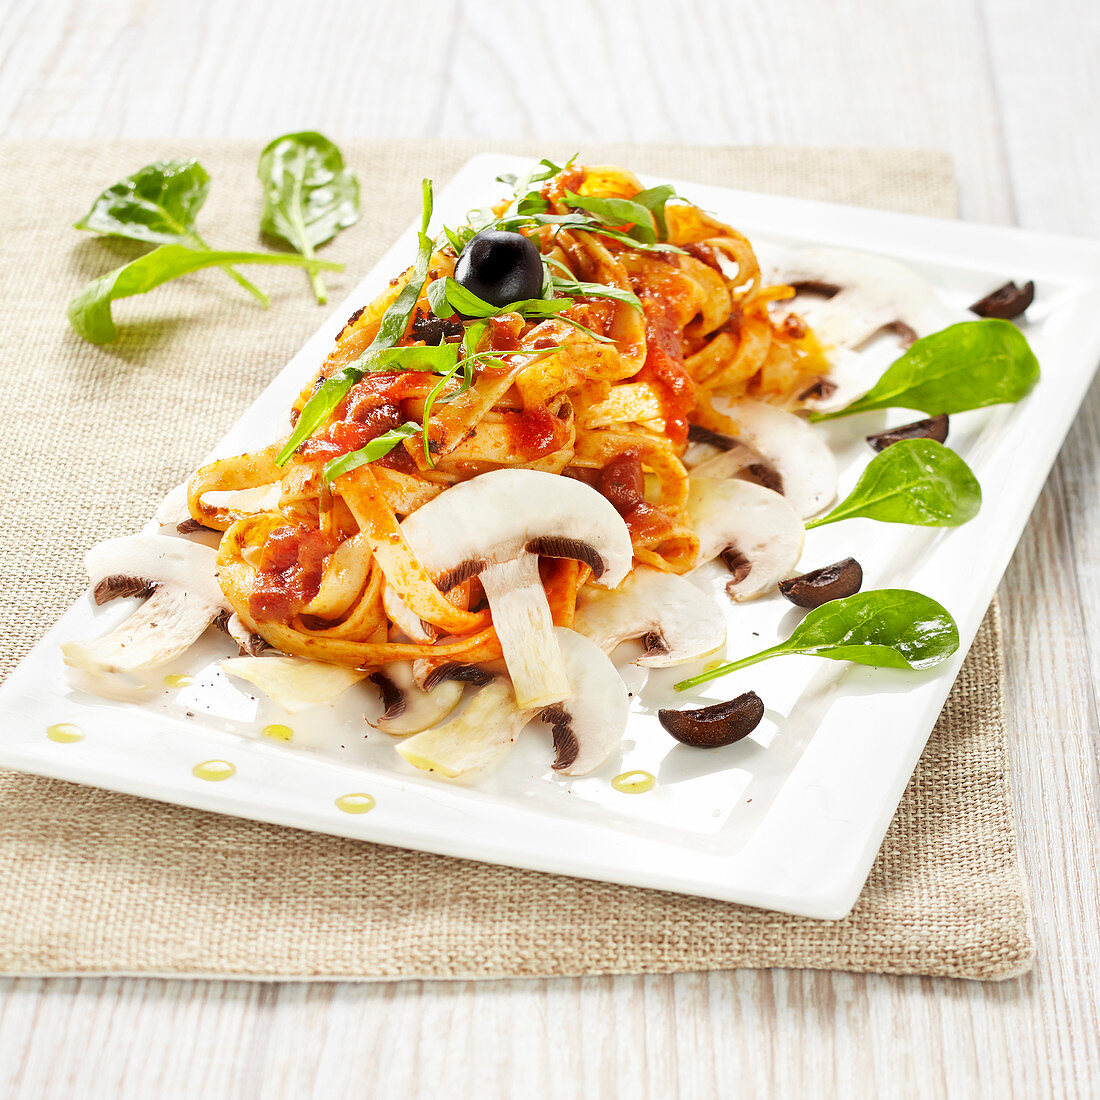 Tagliatelles in tomato sauce with mushrooms, olives and baby spinach